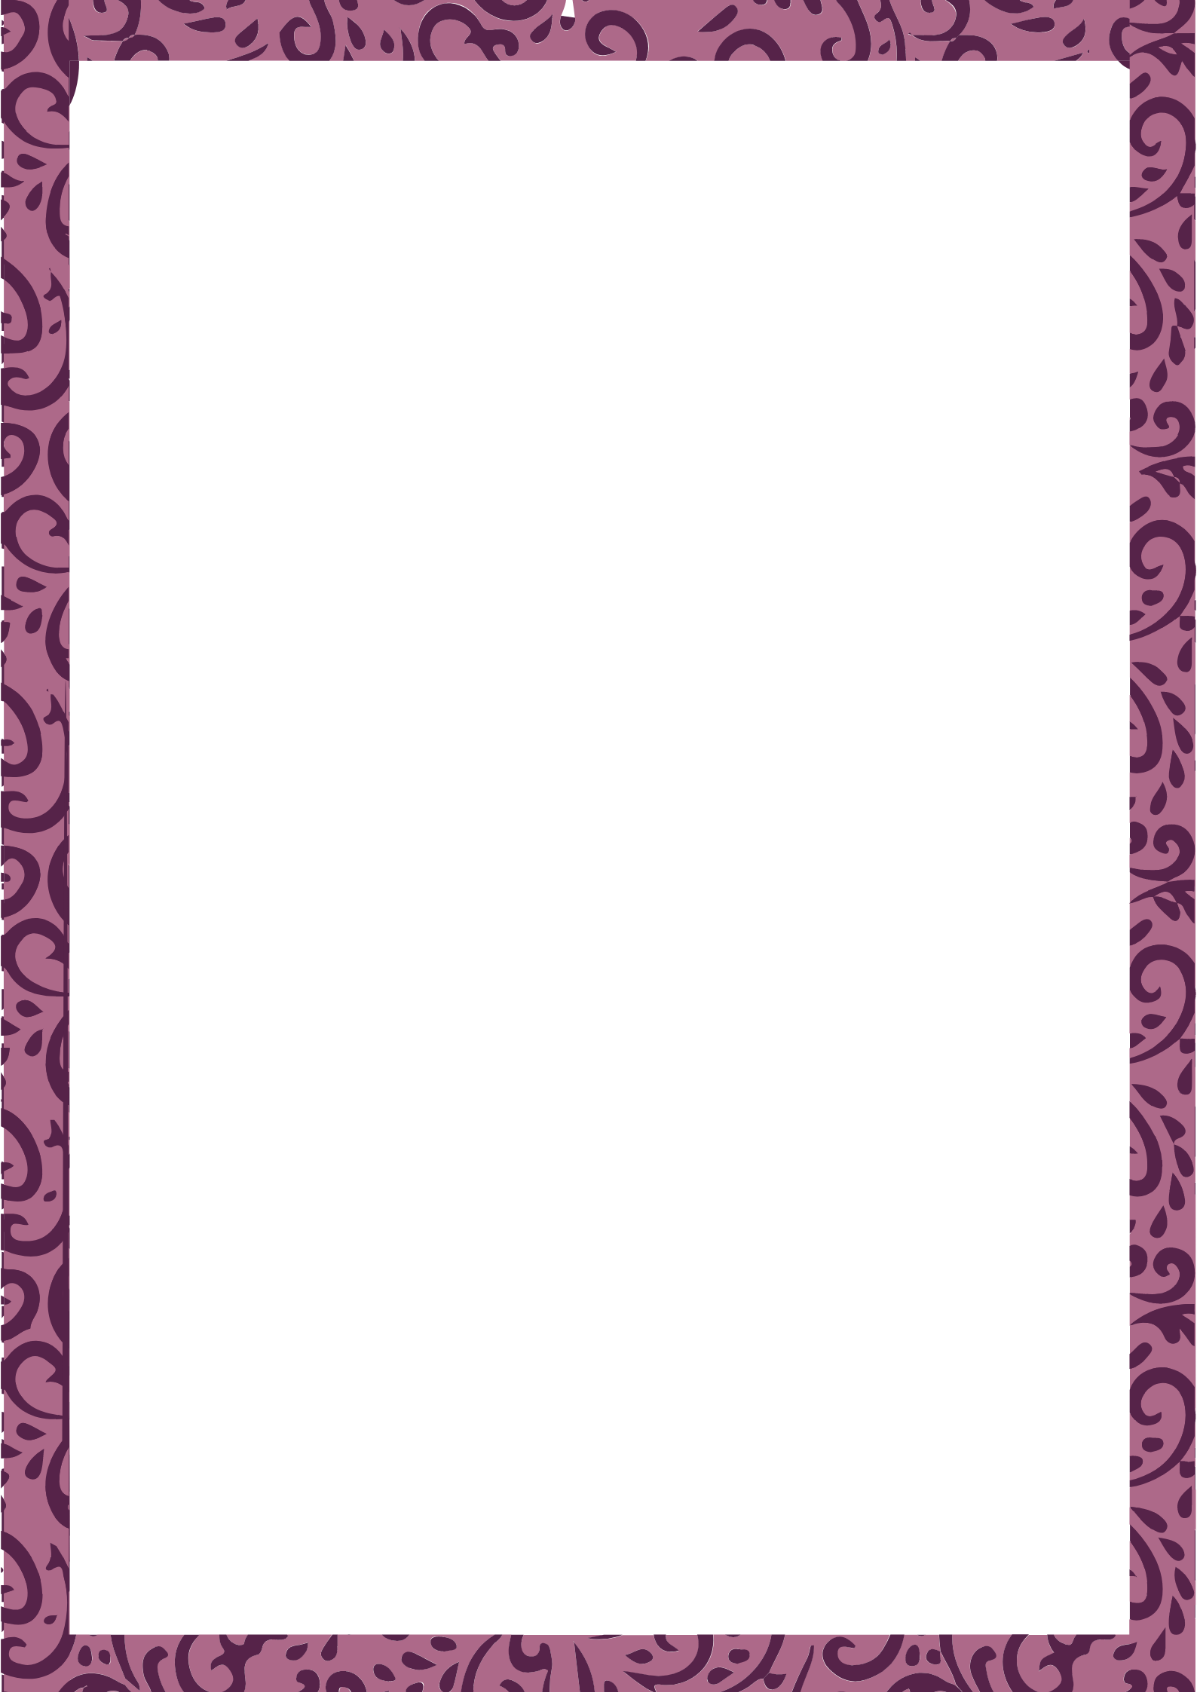 Frame Page Border Template